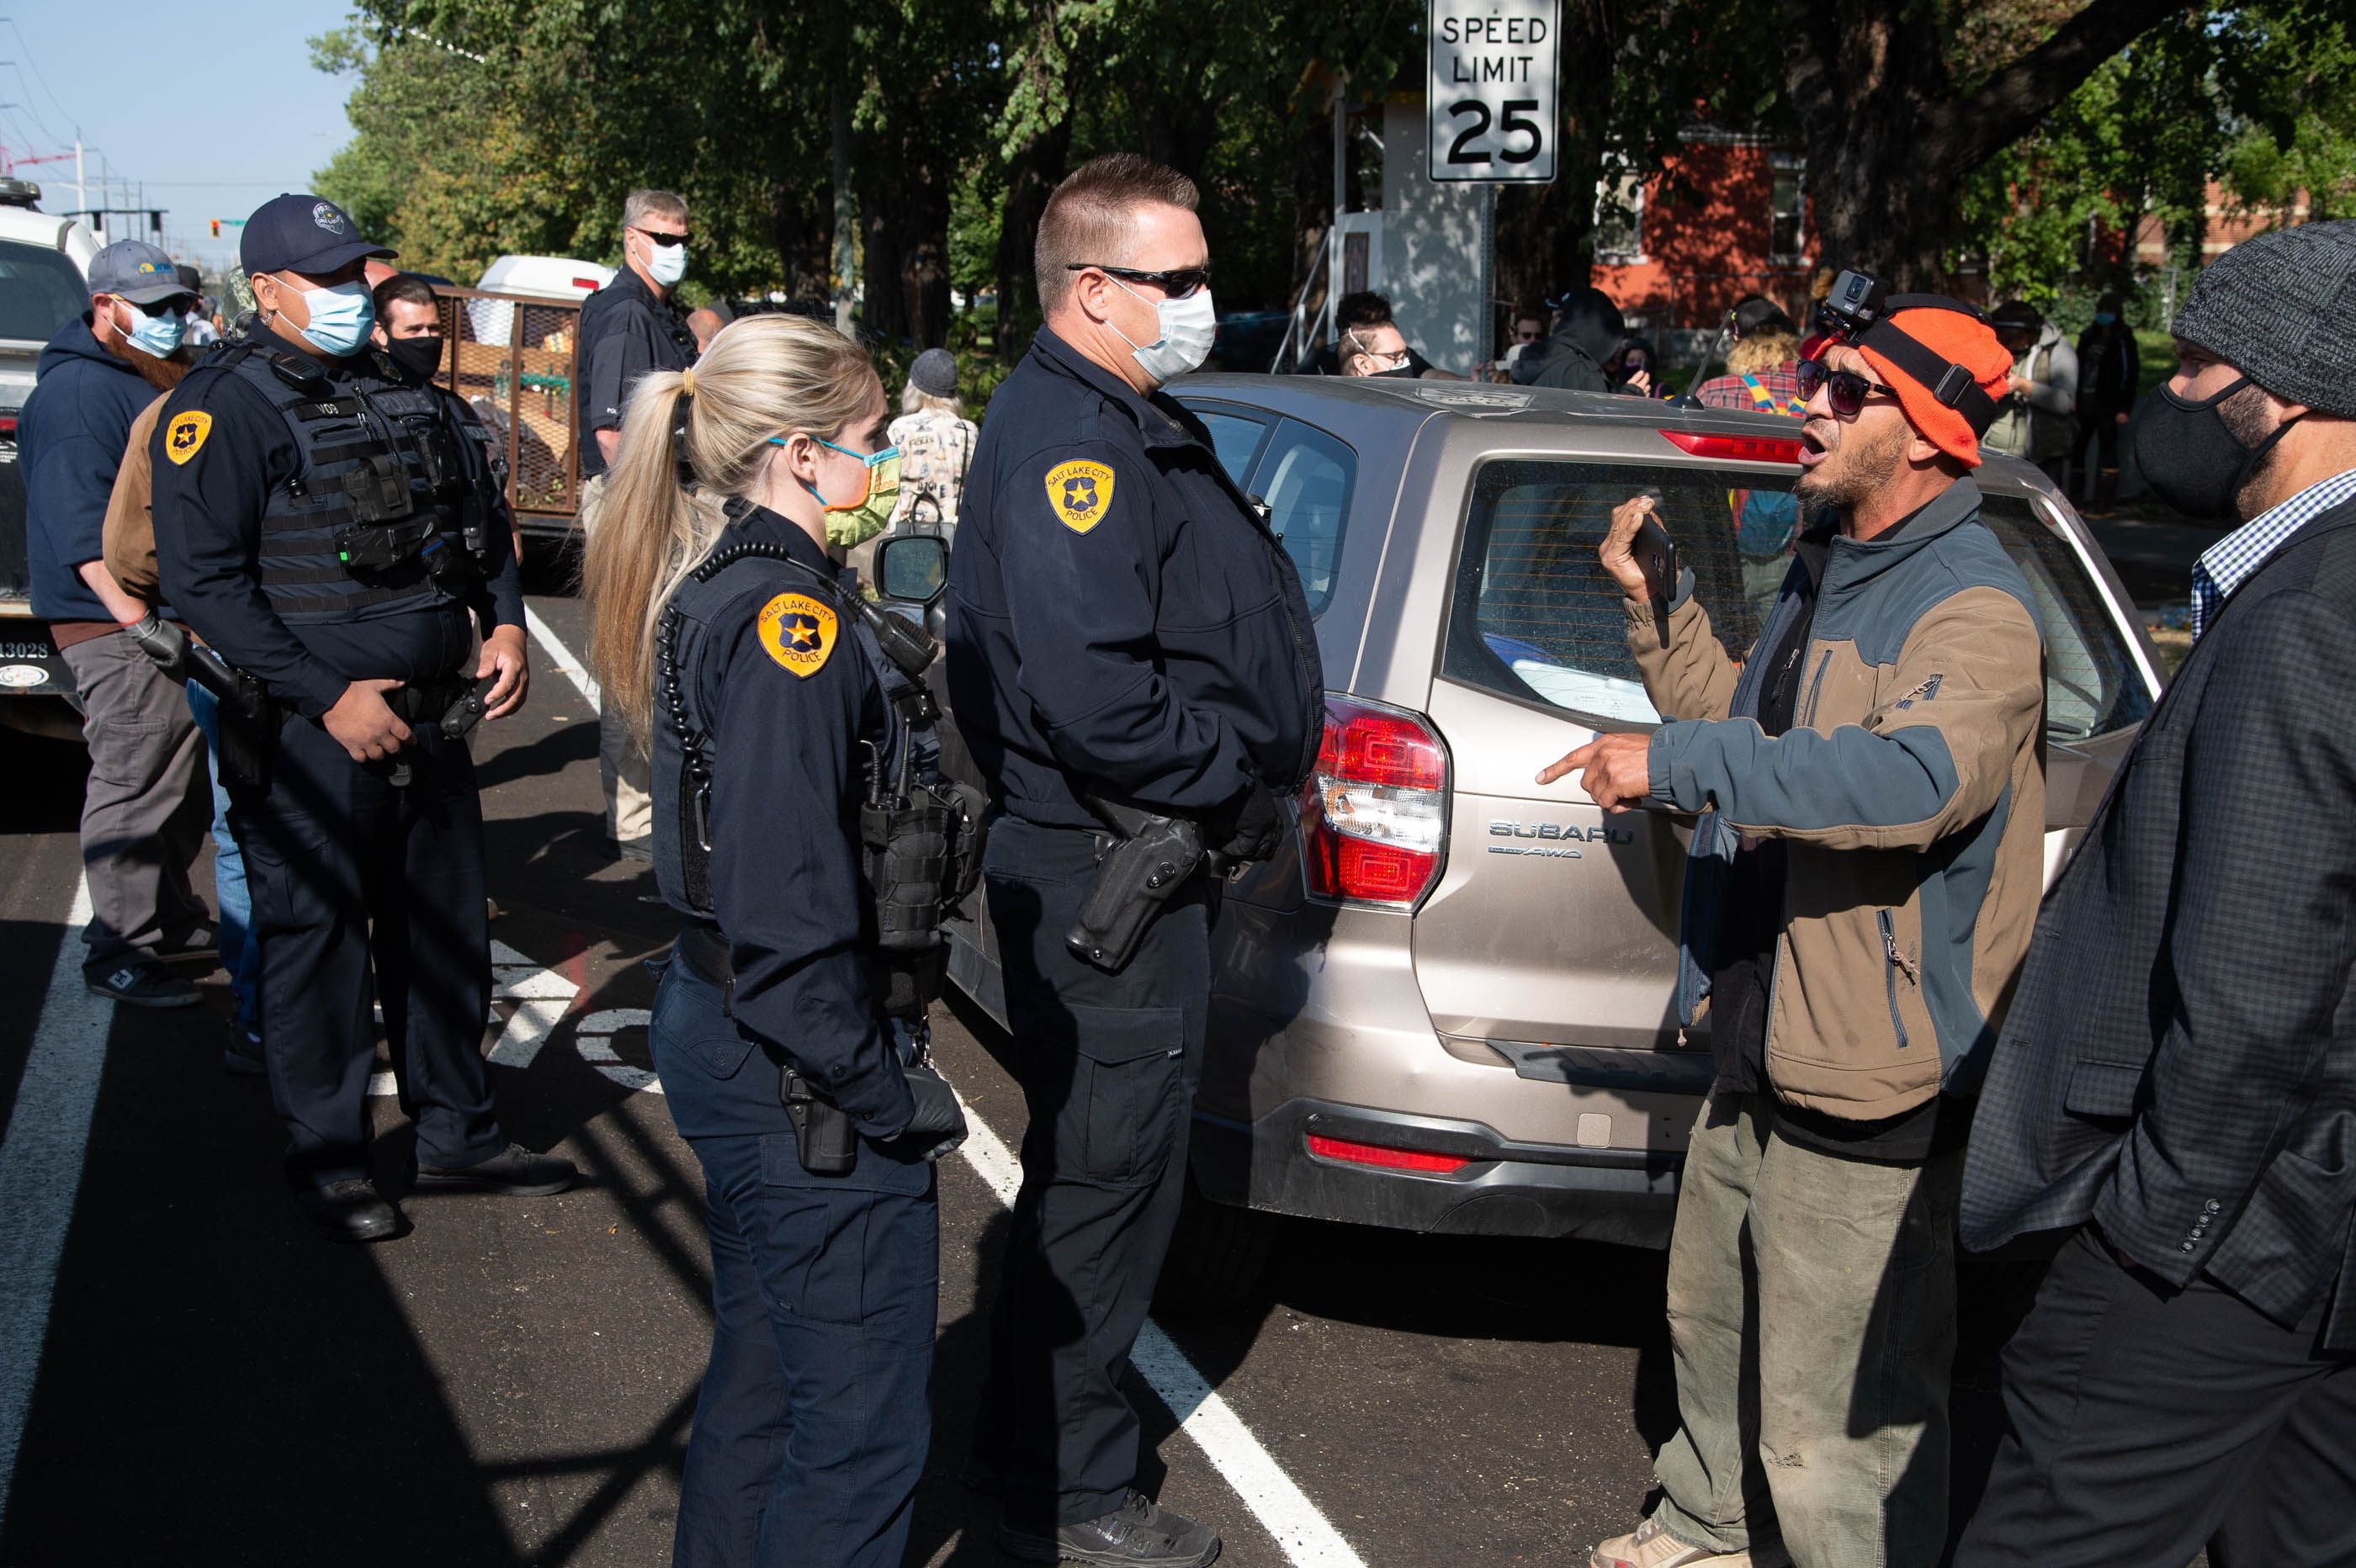 (Francisco Kjolseth  |  The Salt Lake Tribune) Police are confronted by homeless advocates as the Salt Lake County Health Department conducts a cleanup of homeless camps set up near Taufer Park in Salt Lake City on Thursday, Sept. 10, 2020. 